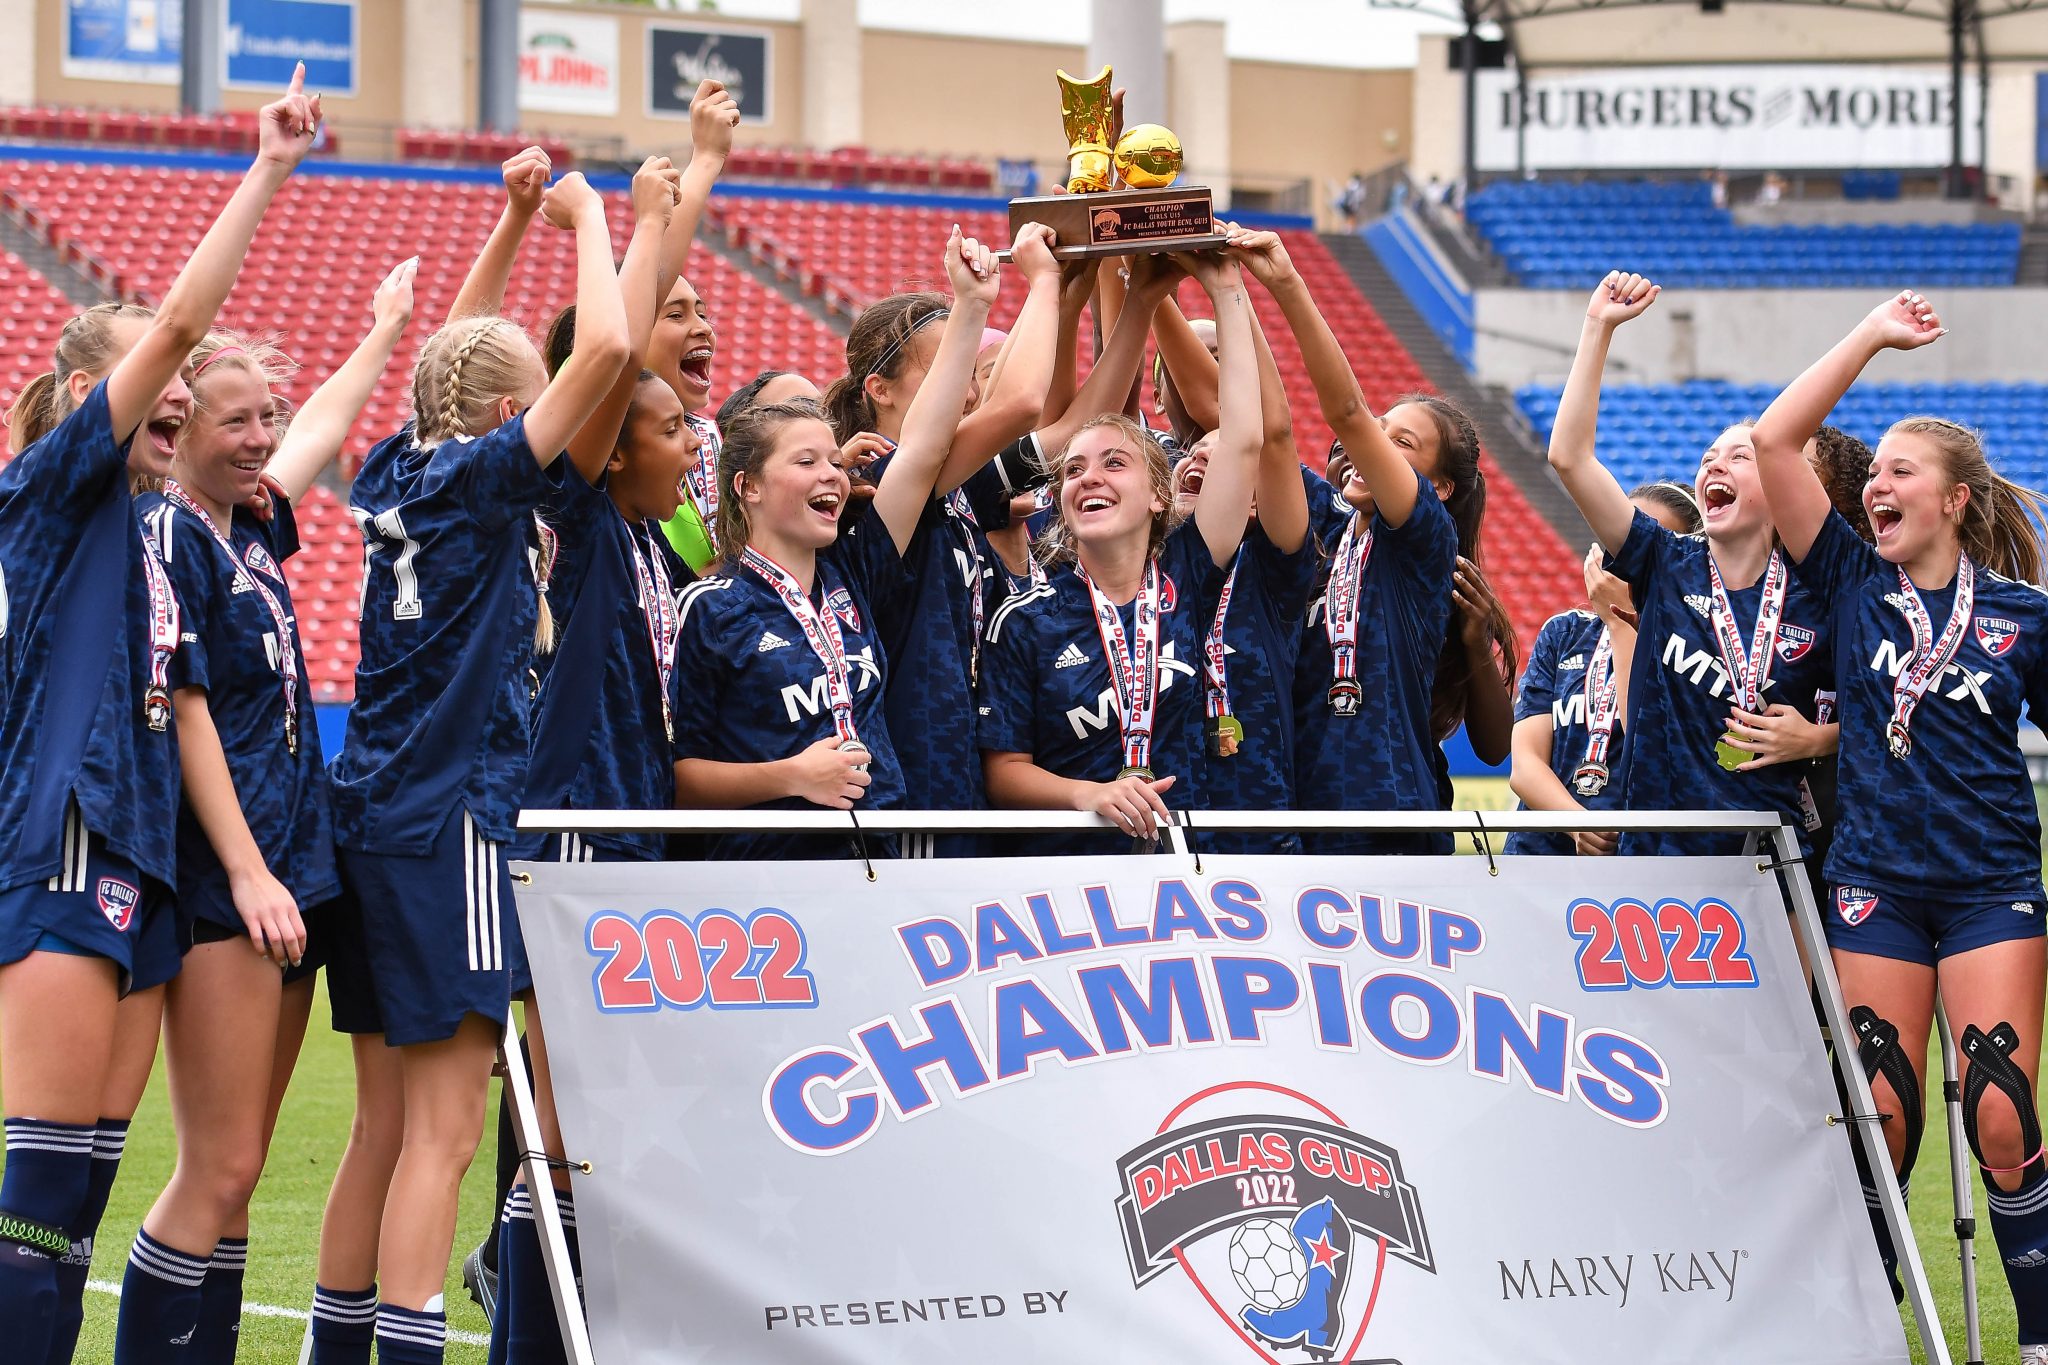 Dallas Cup 2022 Championships Friday 3rd Degree